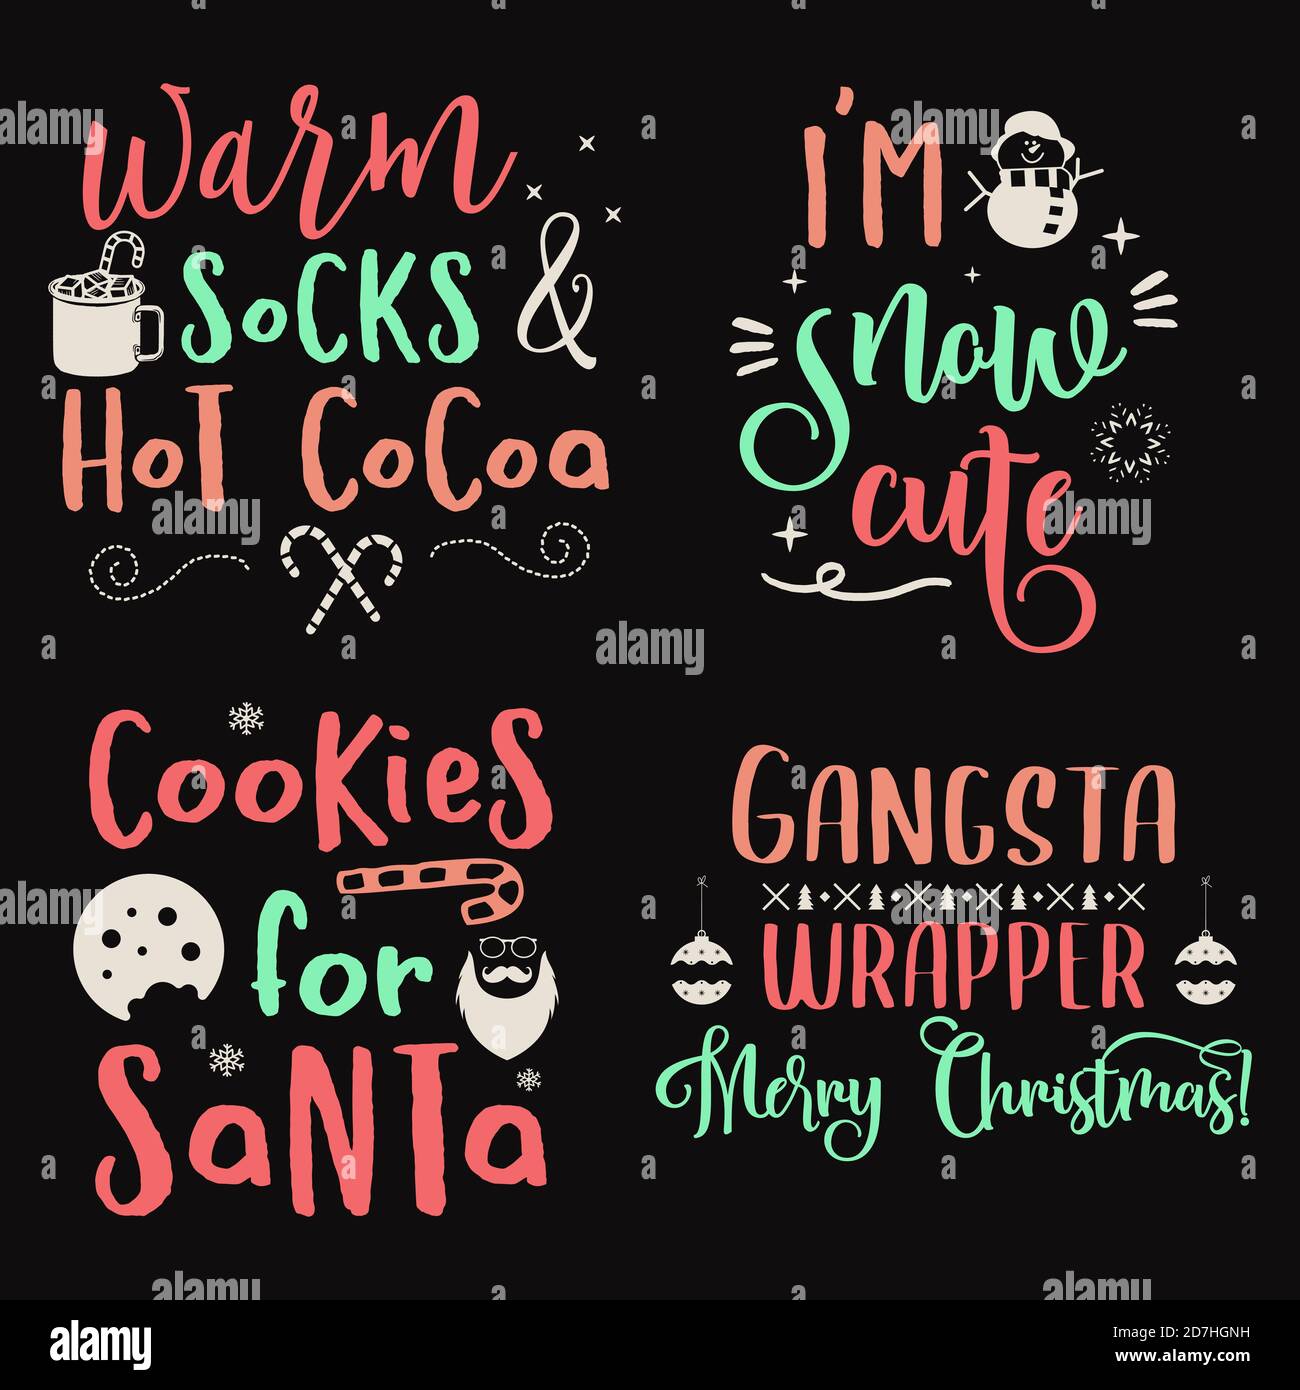 Christmas Lettering Quotes Set Silhouette Calligraphy Posters With Quotes With Santa Candy Decor Illustrations For Greeting Card T Shirt Print Stock Vector Image Art Alamy https www alamy com christmas lettering quotes set silhouette calligraphy posters with quotes with santa candy decor illustrations for greeting card t shirt print image383317021 html